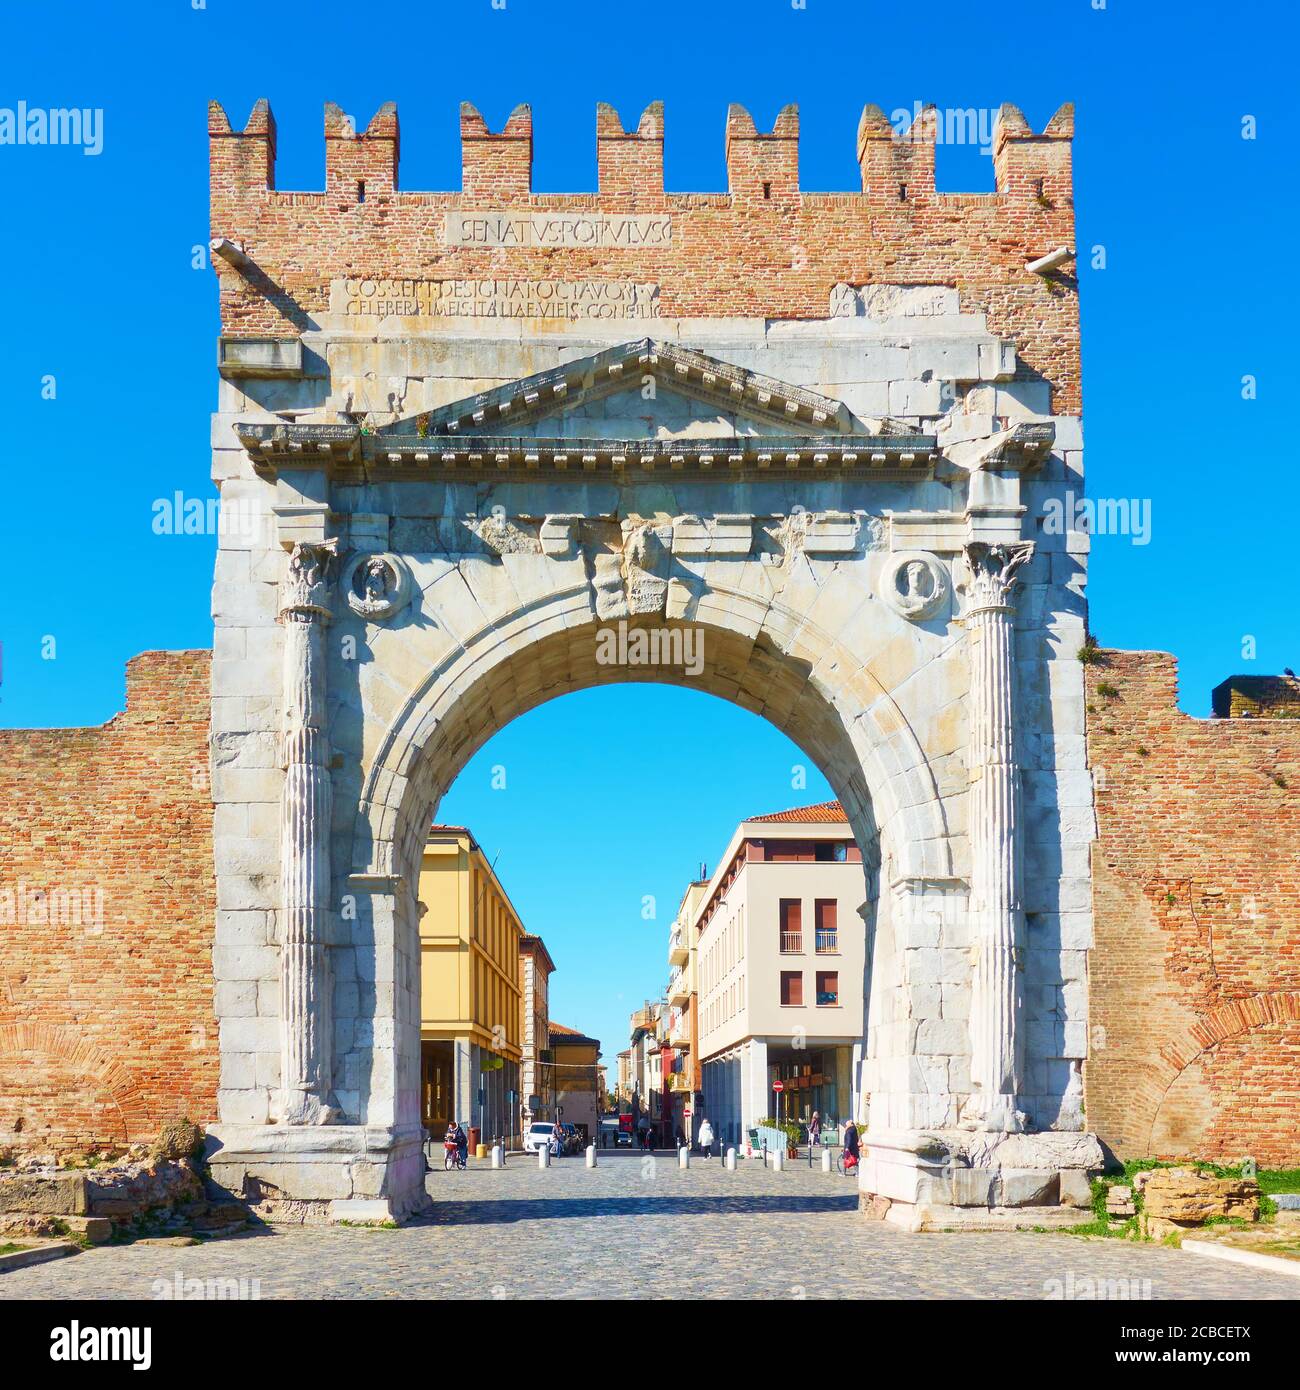 Arch of Augustus. Gate in the old town of Rimini, Italy. Italian landmark Stock Photo